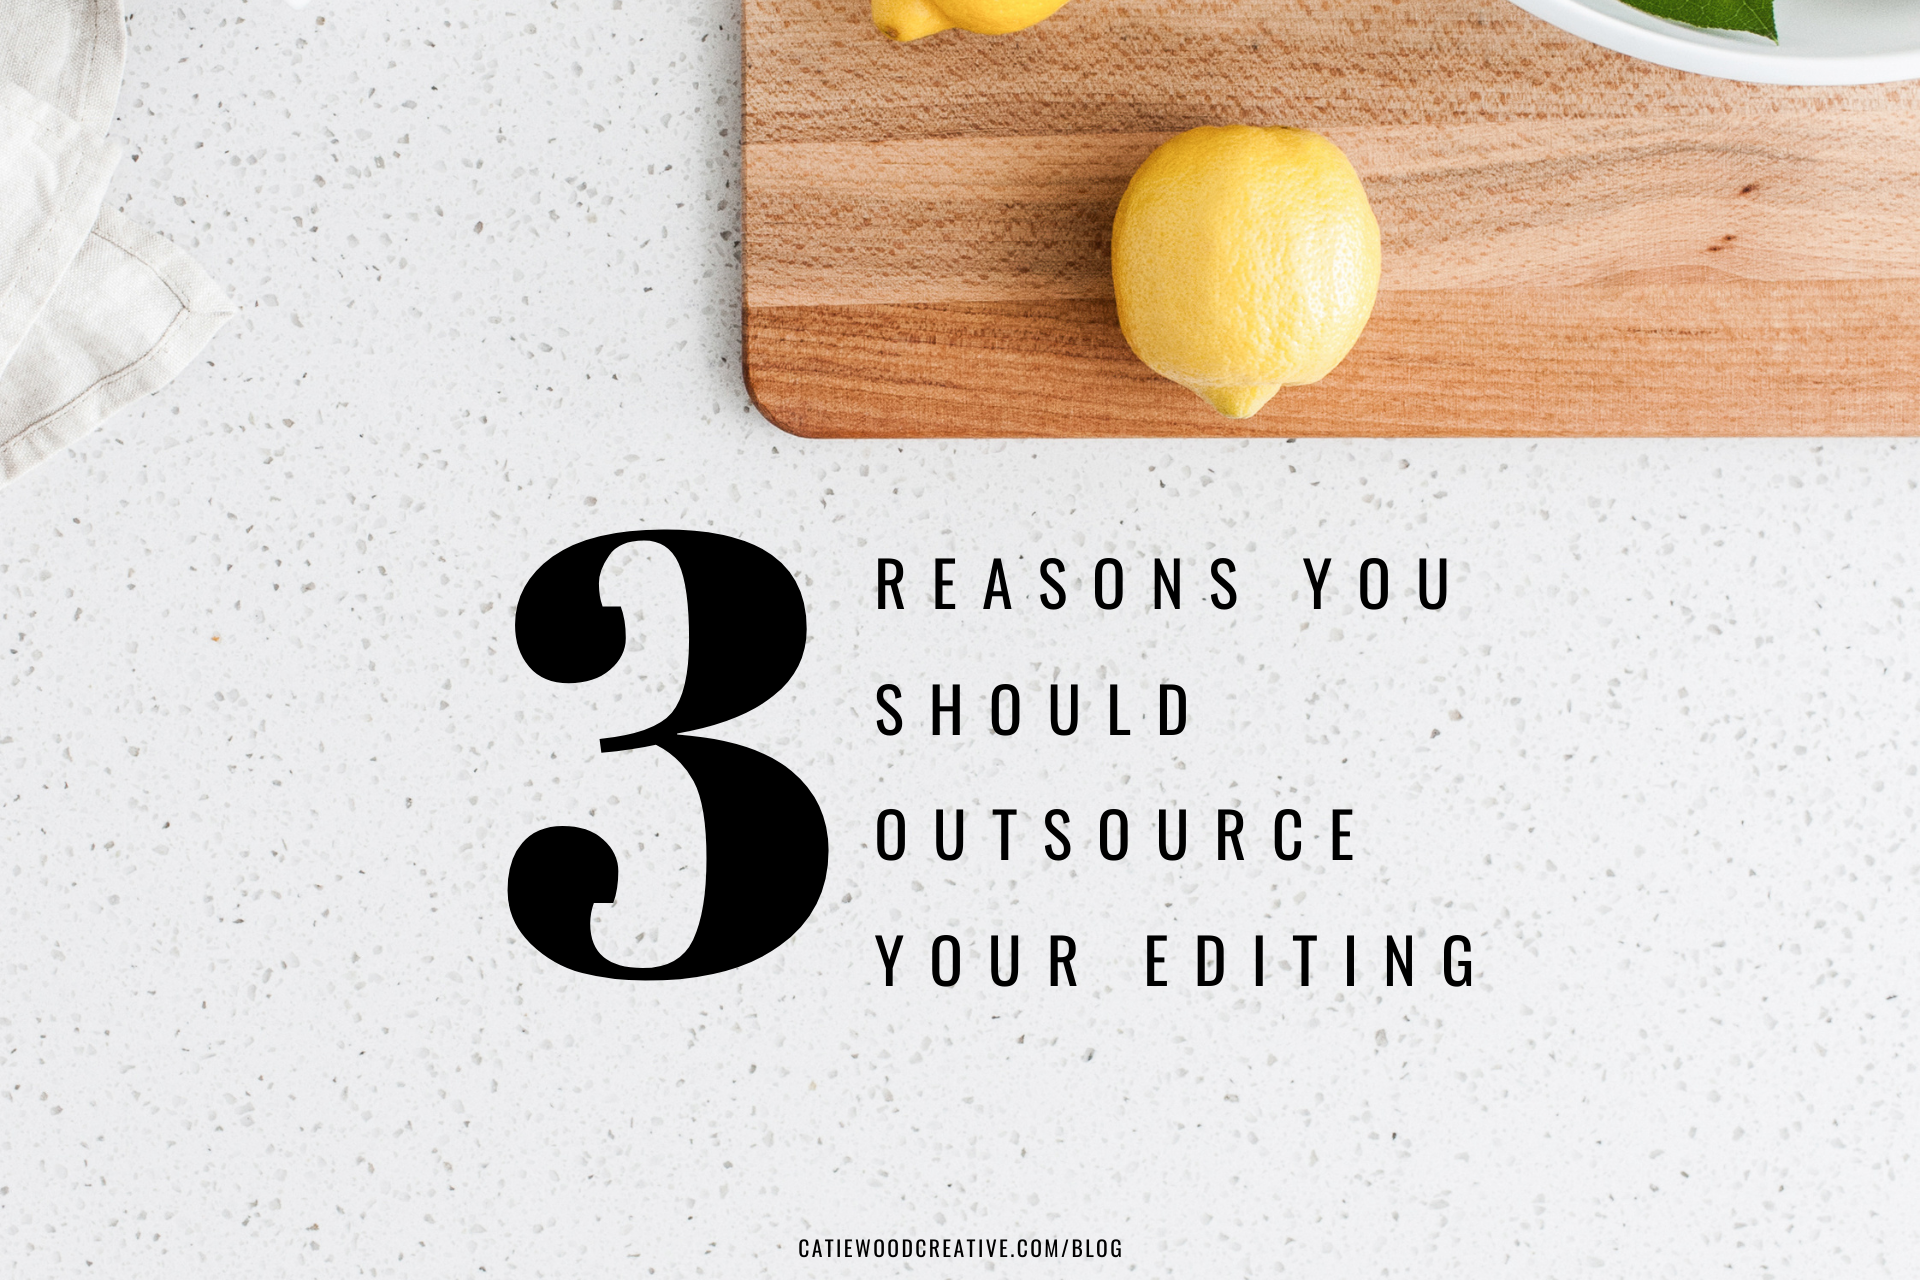 3 reasons you should outsource your editing